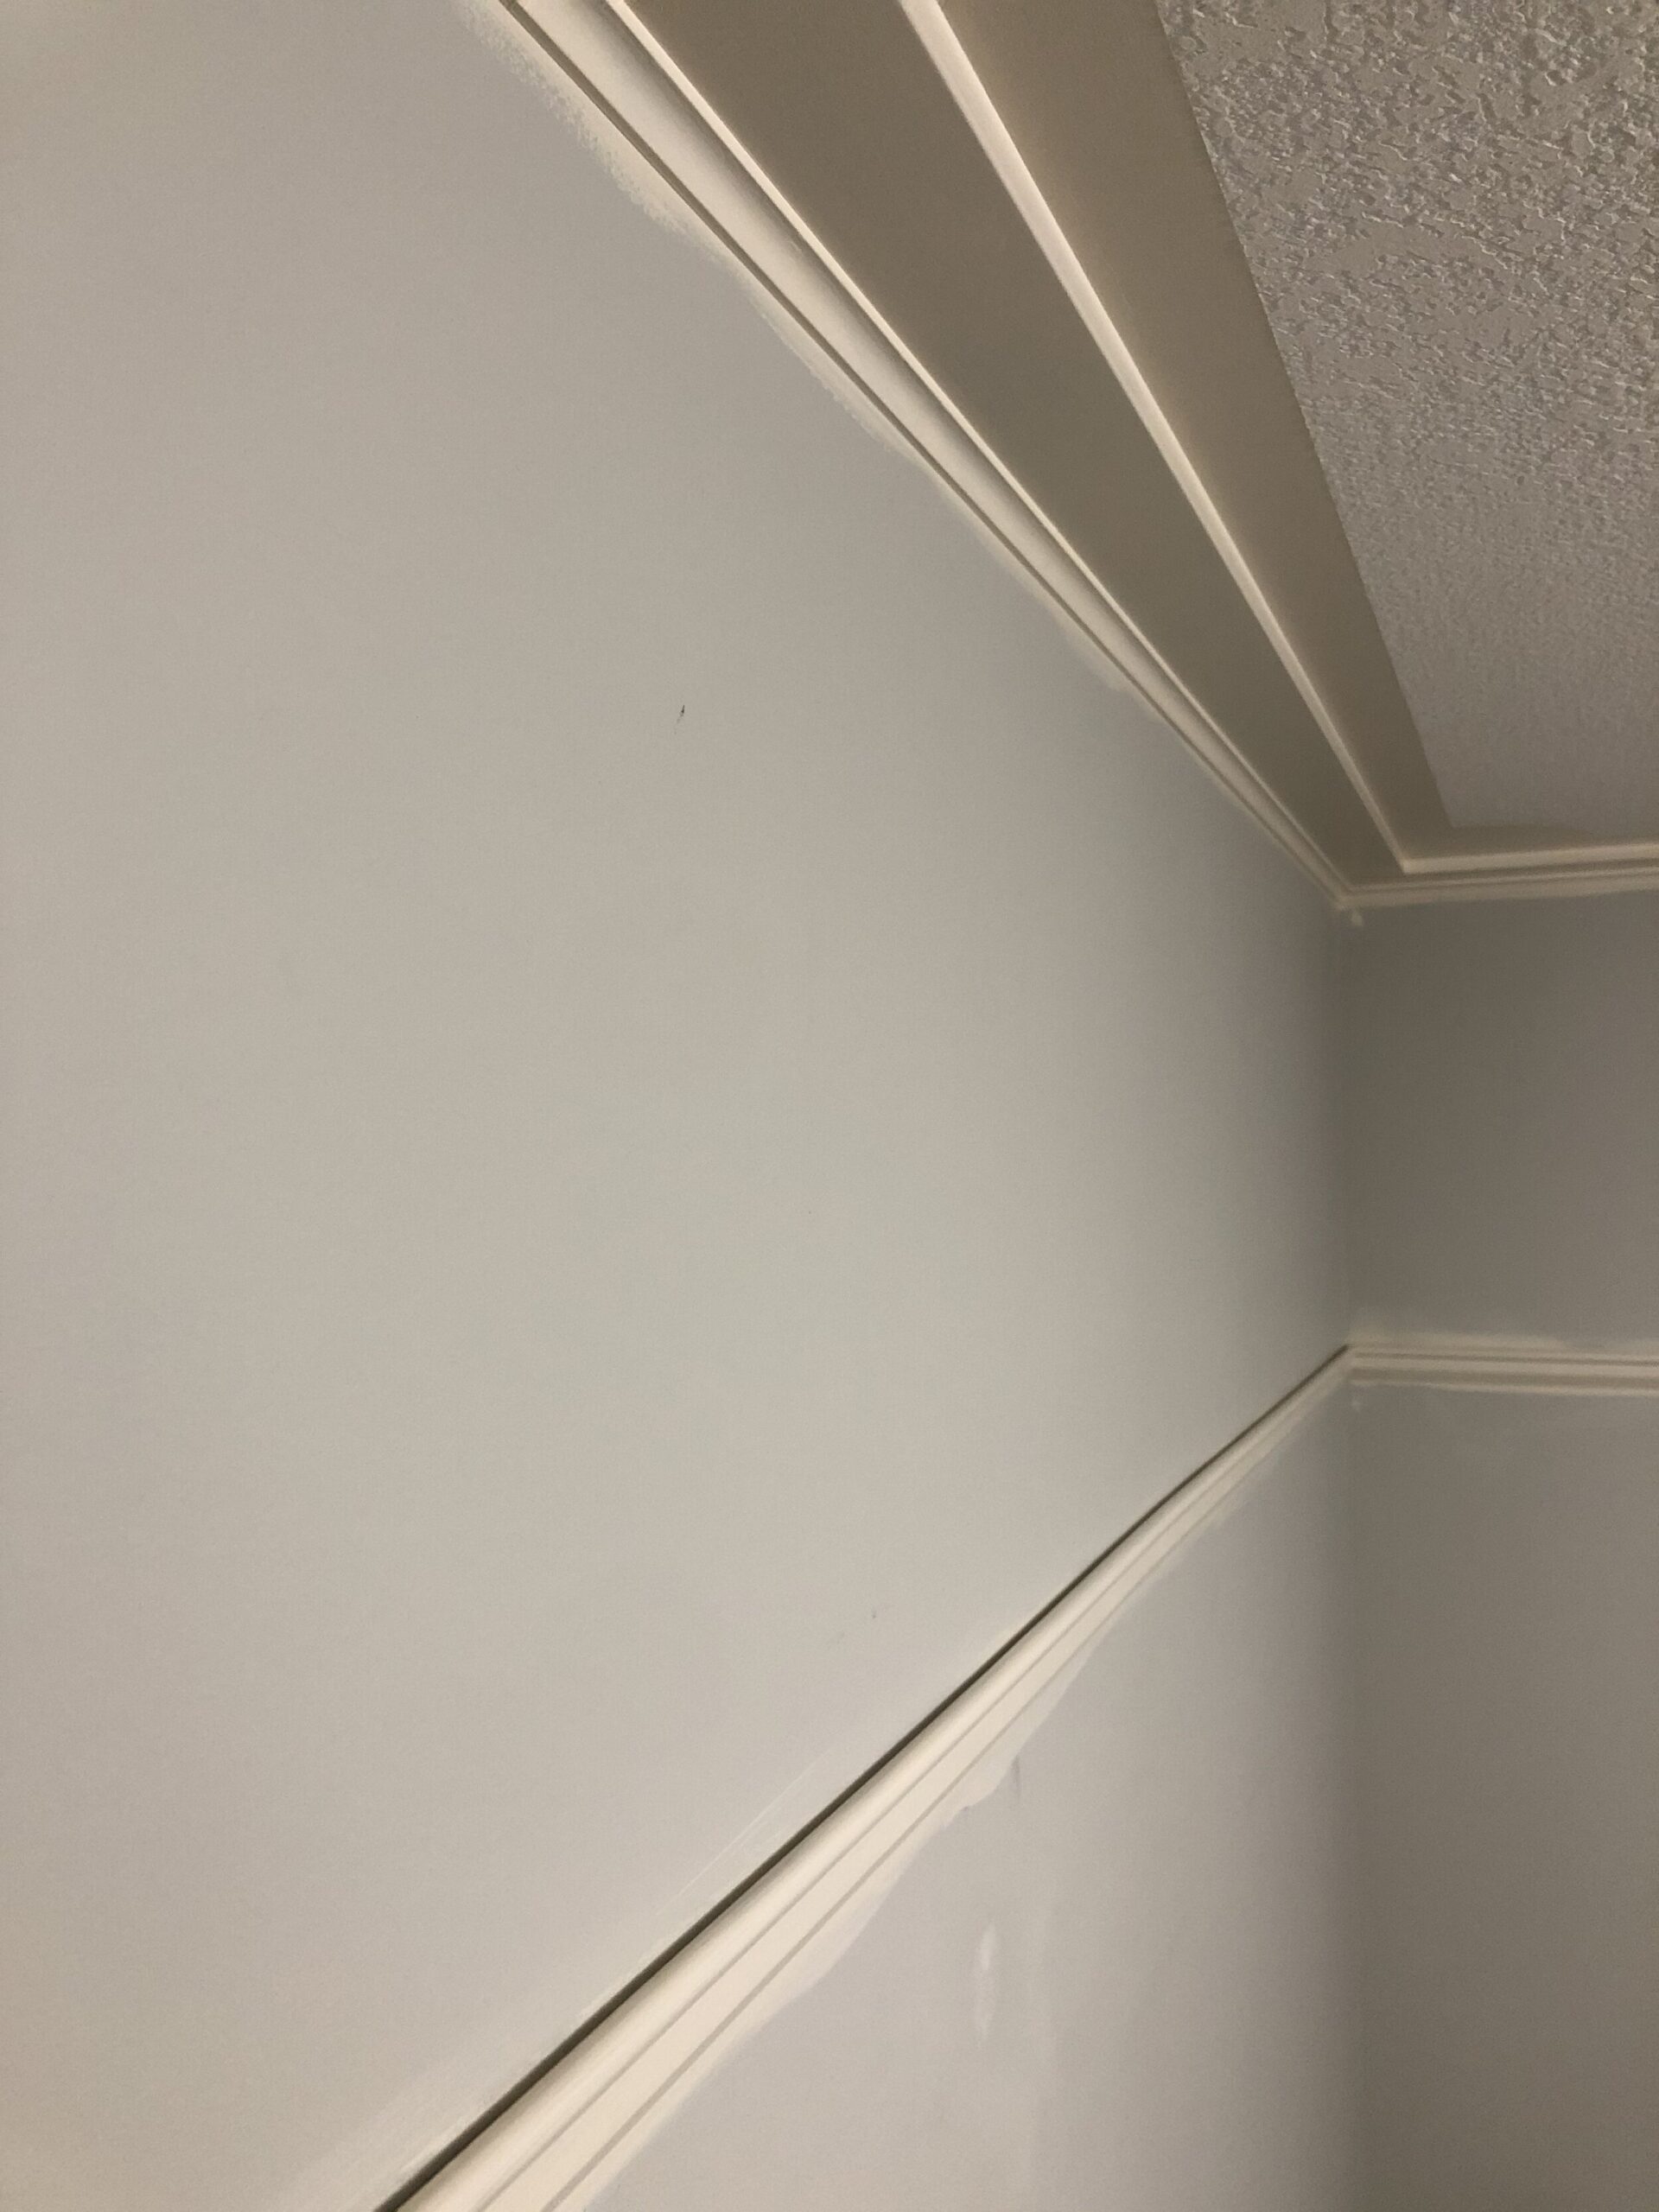 installed picture rail and crown moulding 